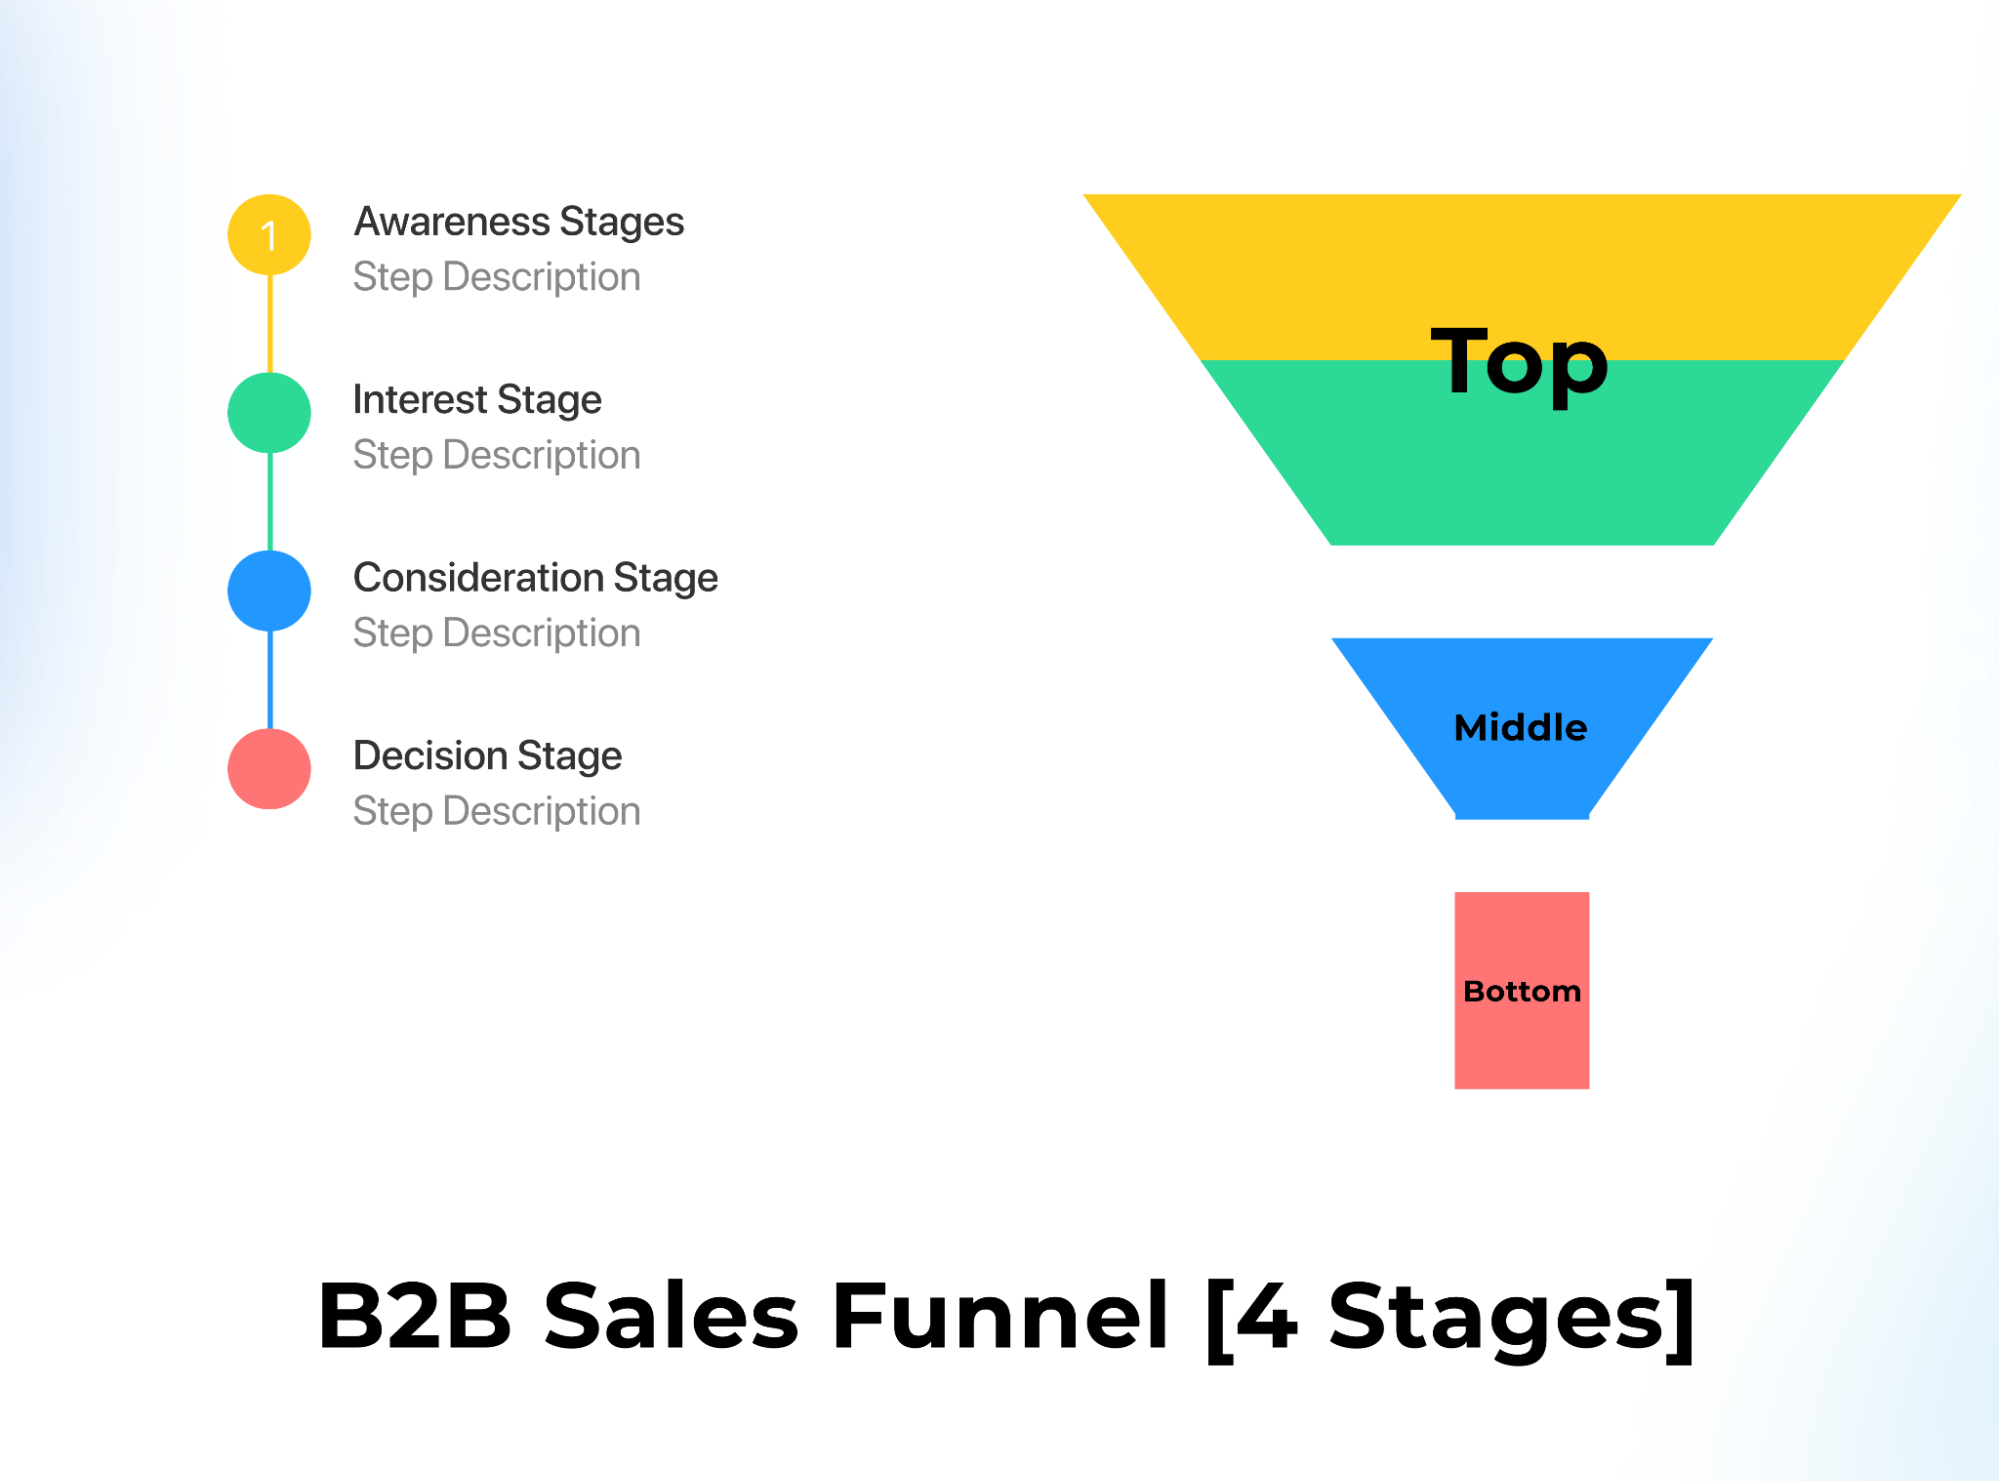 How To Build A B2b Marketing And Sales Funnel That Grows Your Roi